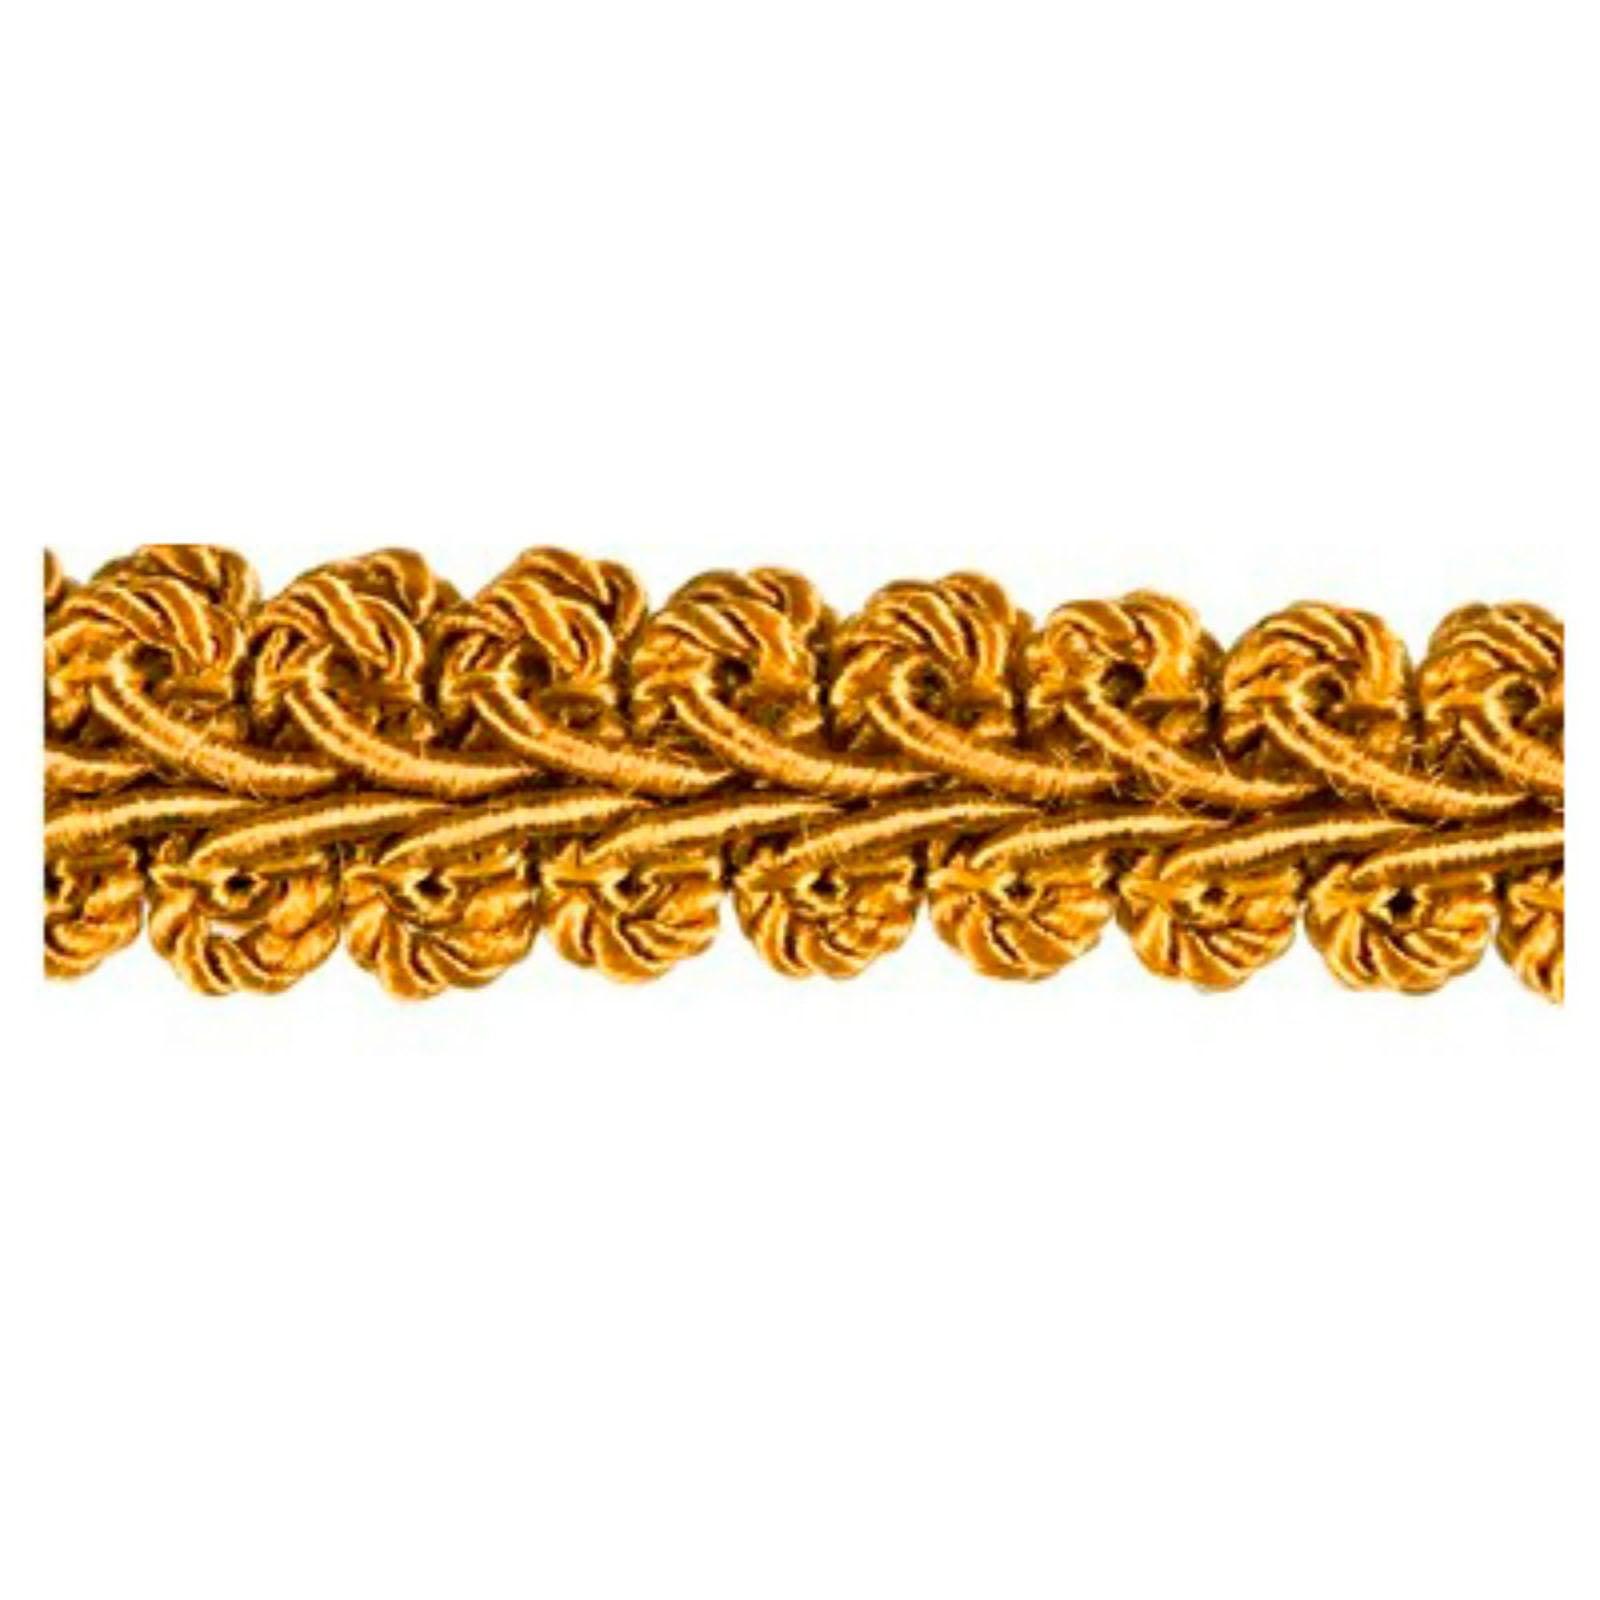 Conso French Gimp - D05 Old Gold - Conso French Gimp, trim, trimming